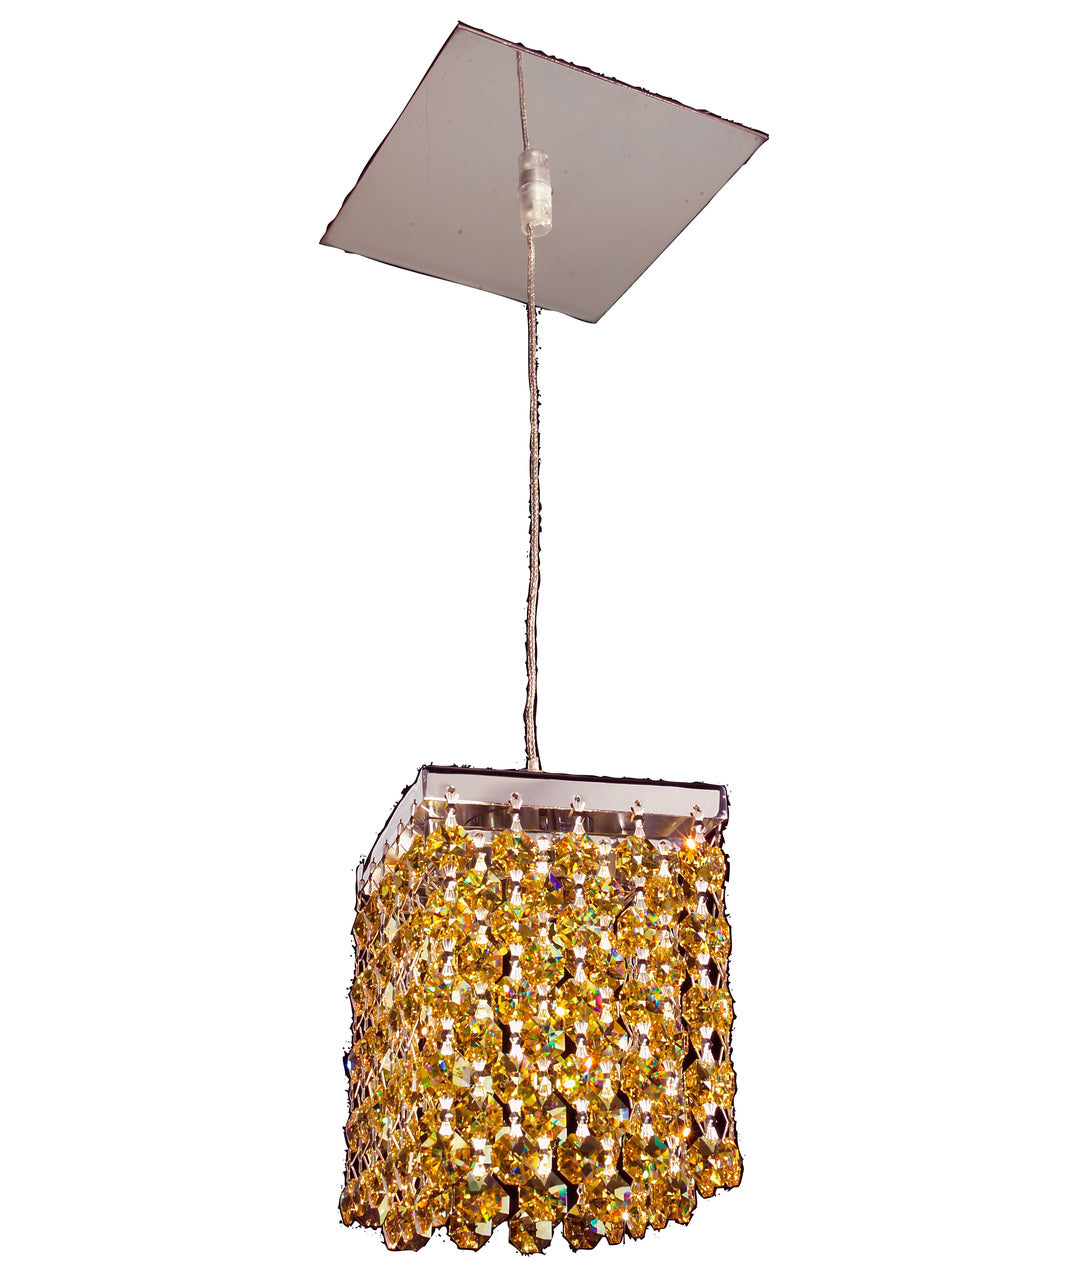 Classic Lighting 16101 SLT-S Bedazzle Crystal Pendant in Chrome